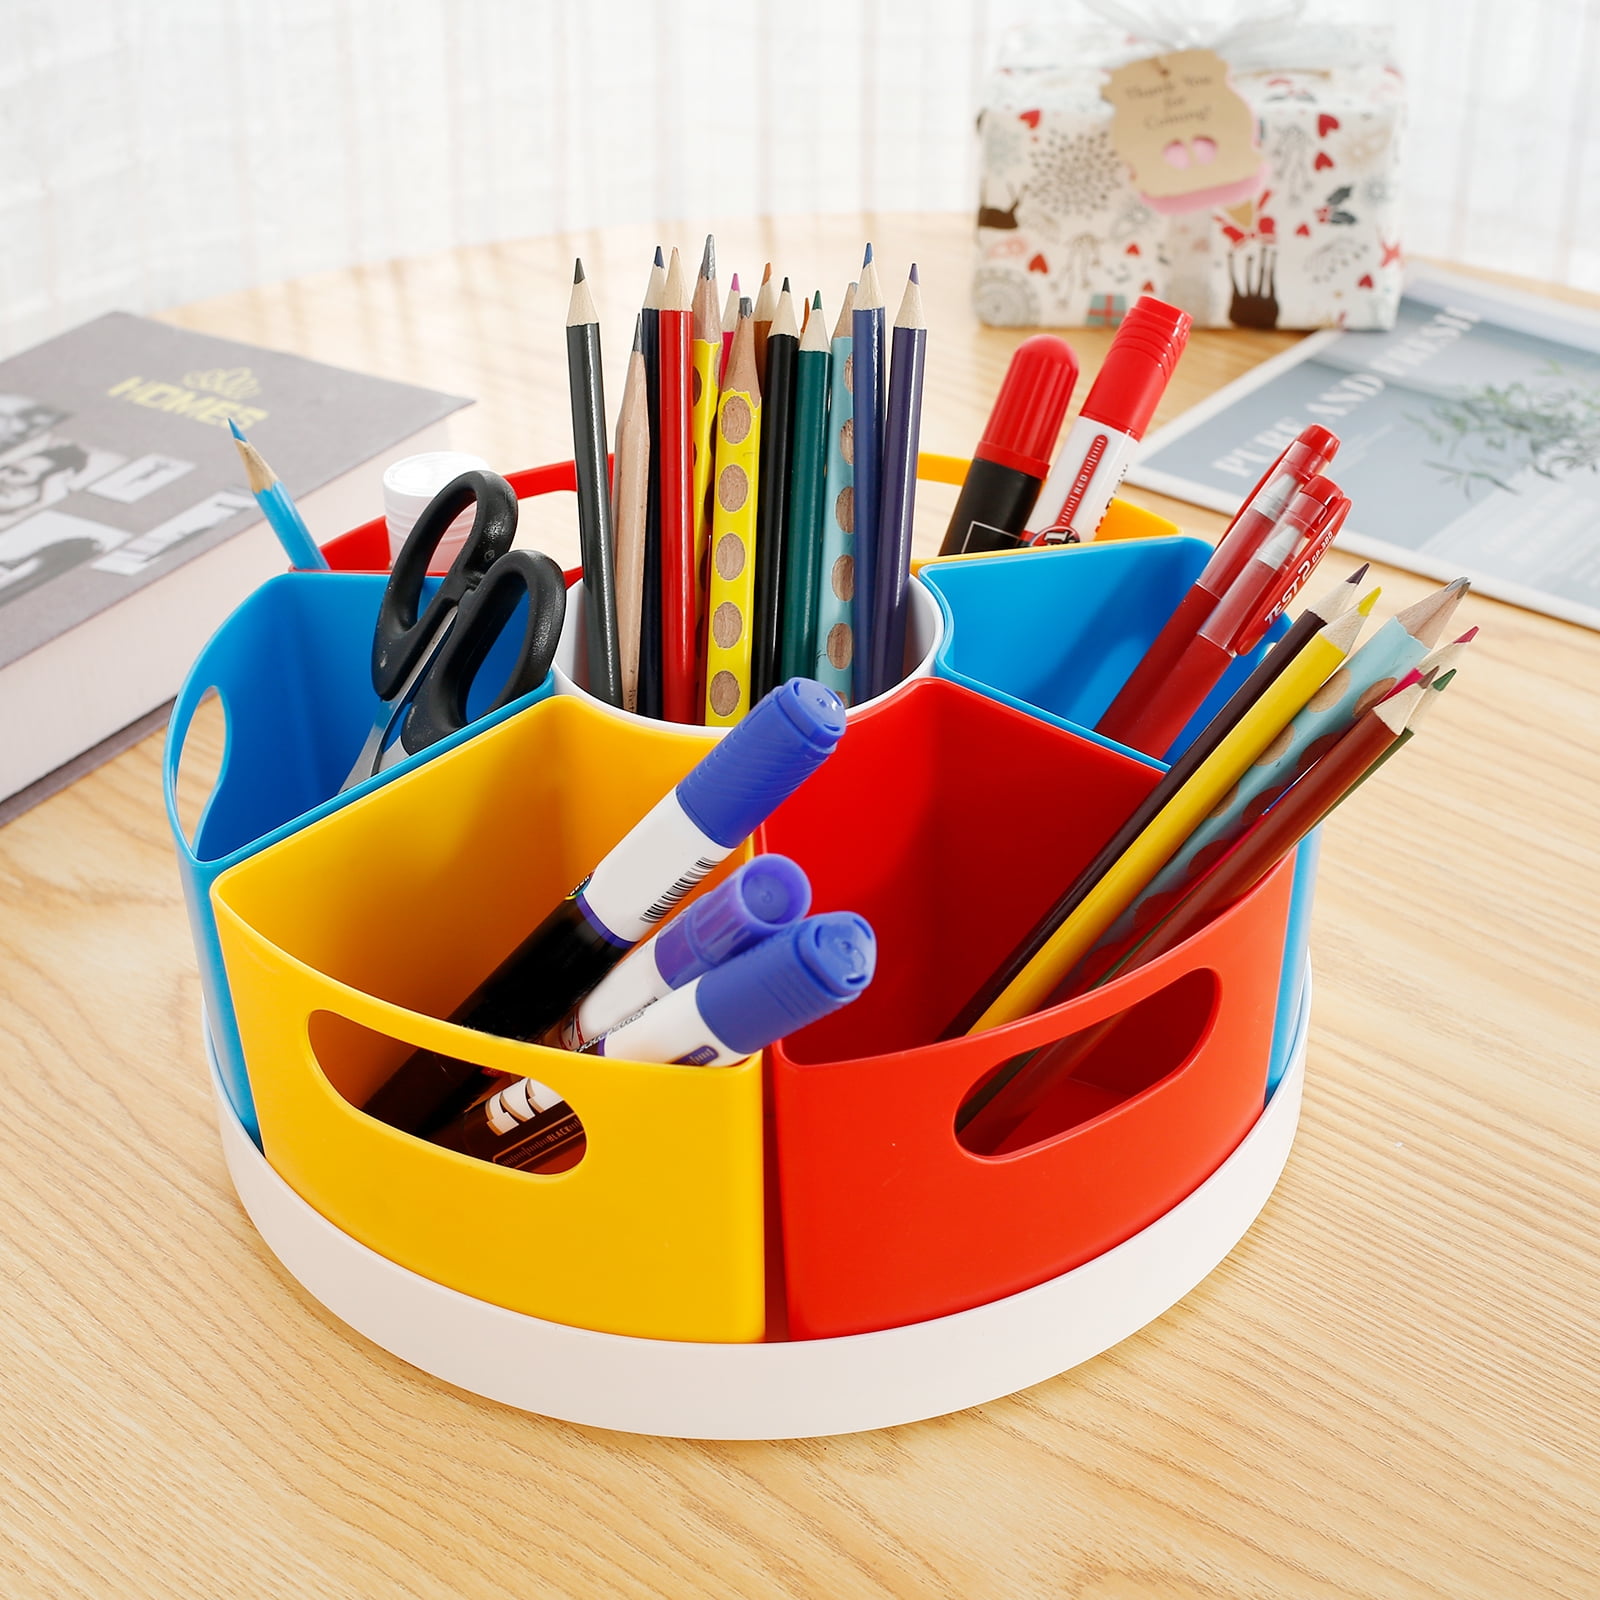 360 Degree Rotating Pencil Holder, Multi-functional Pencil Caddy for Pen Crayon Marker Desk Organizer for Home Office Classroom School, Size: 15